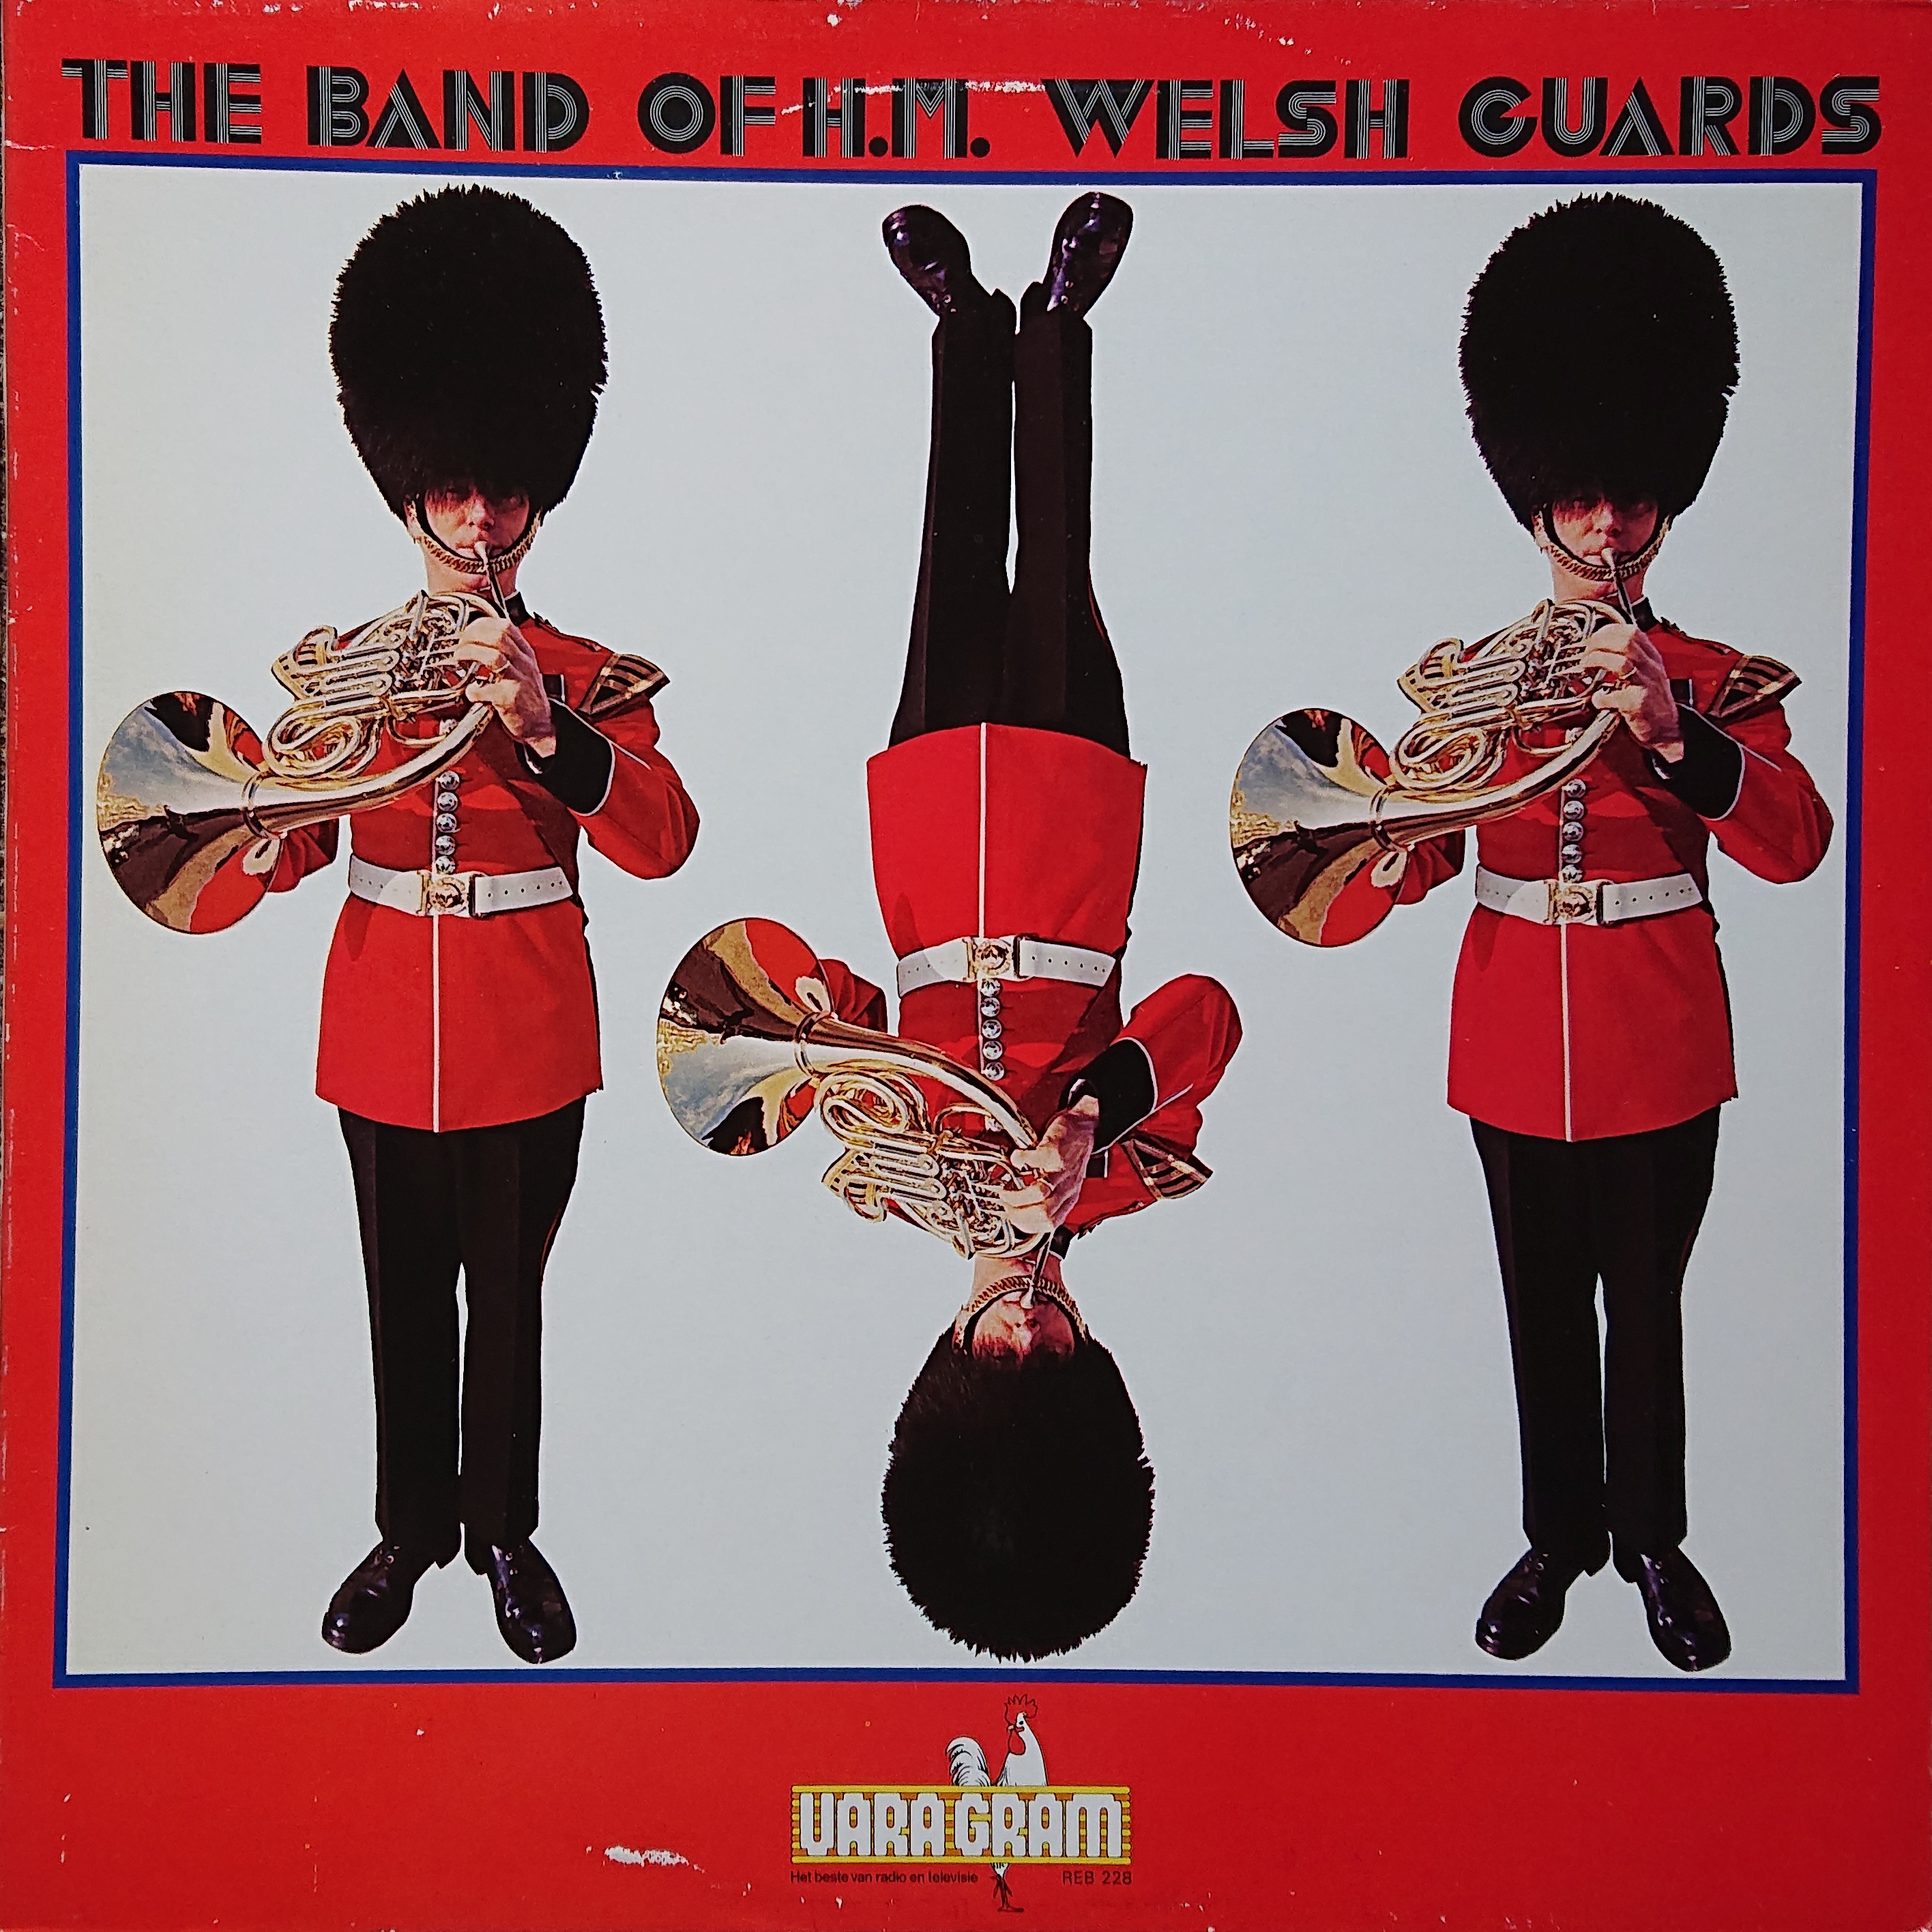 Picture of REB 228-iD Hands across the sea by artist The Band of the Welsh Guards from the BBC albums - Records and Tapes library